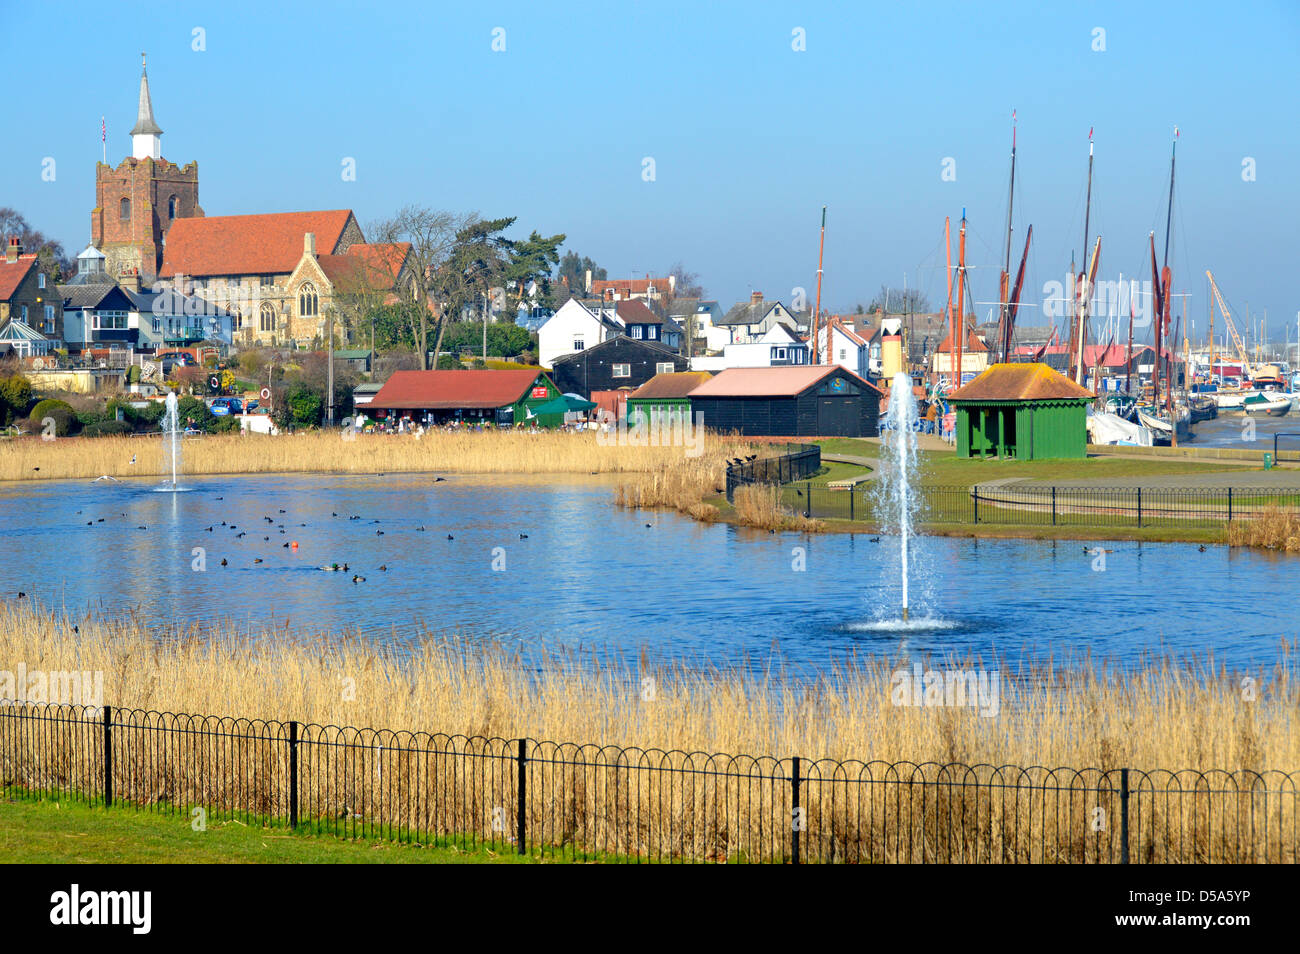 Pond & fountain landscape in Promenade Park adjoins River Blackwater estuary church & masts of Thames sailing barges beyond in Maldon Essex England UK Stock Photo